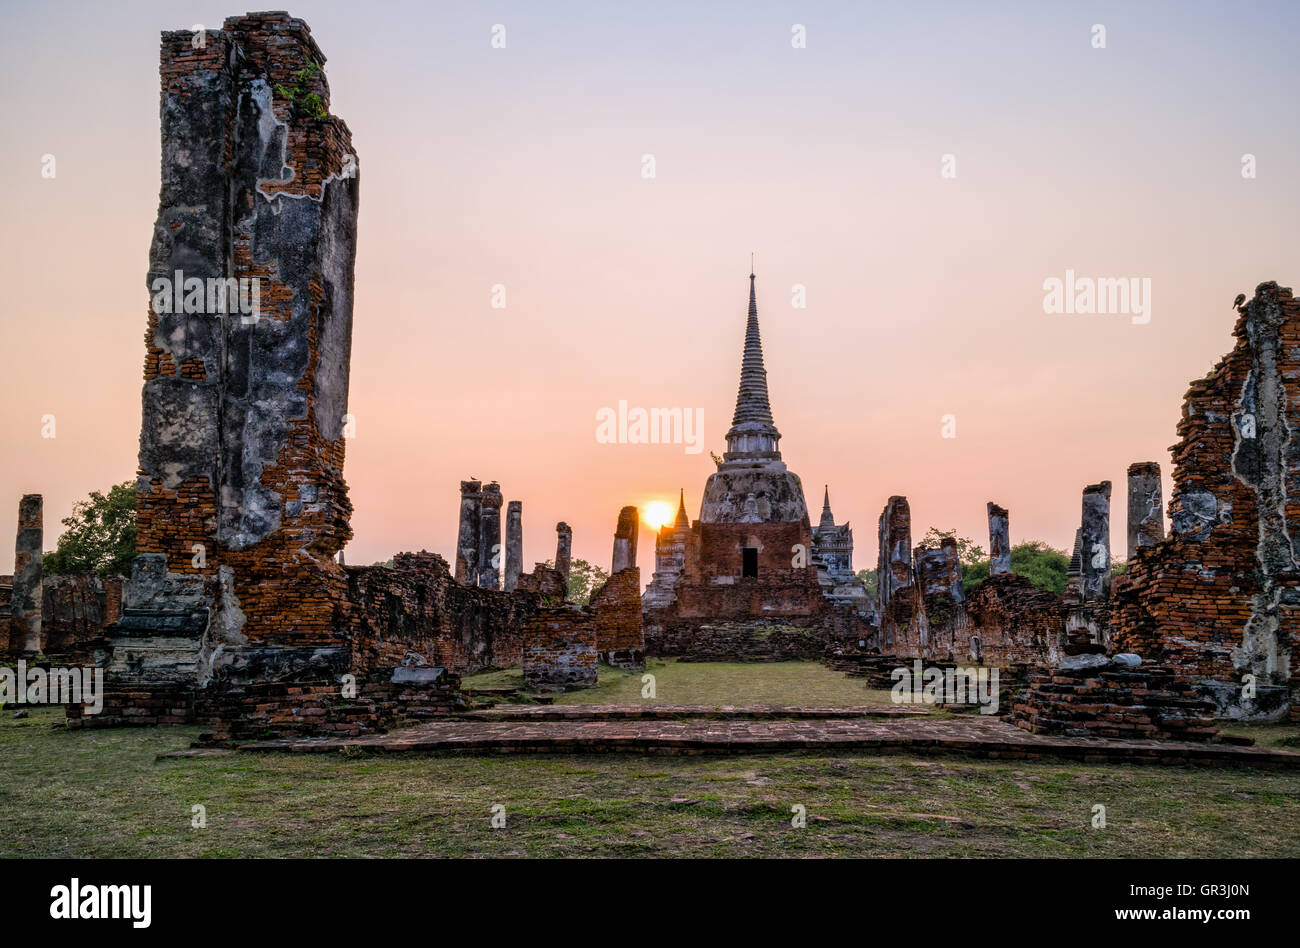 Ruins and pagoda ancient architecture of Wat Phra Si Sanphet old temple famous attractions during sunset at Ayutthaya, Thailand Stock Photo